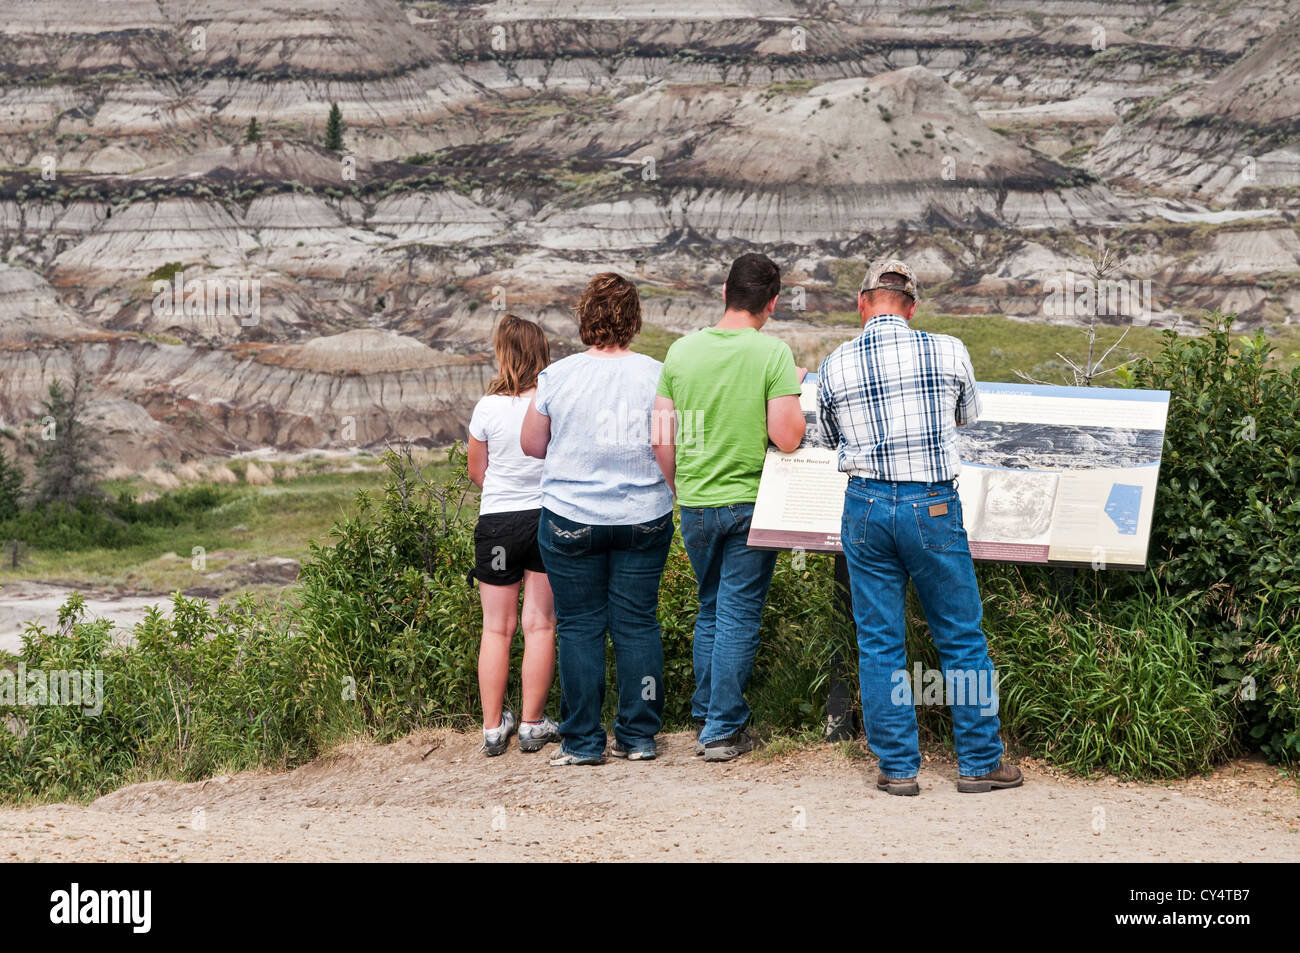 A vacationing family of four visits Horseshoe Canyon located in Alberta Canada's badlands near the town of Drumheller. Stock Photo